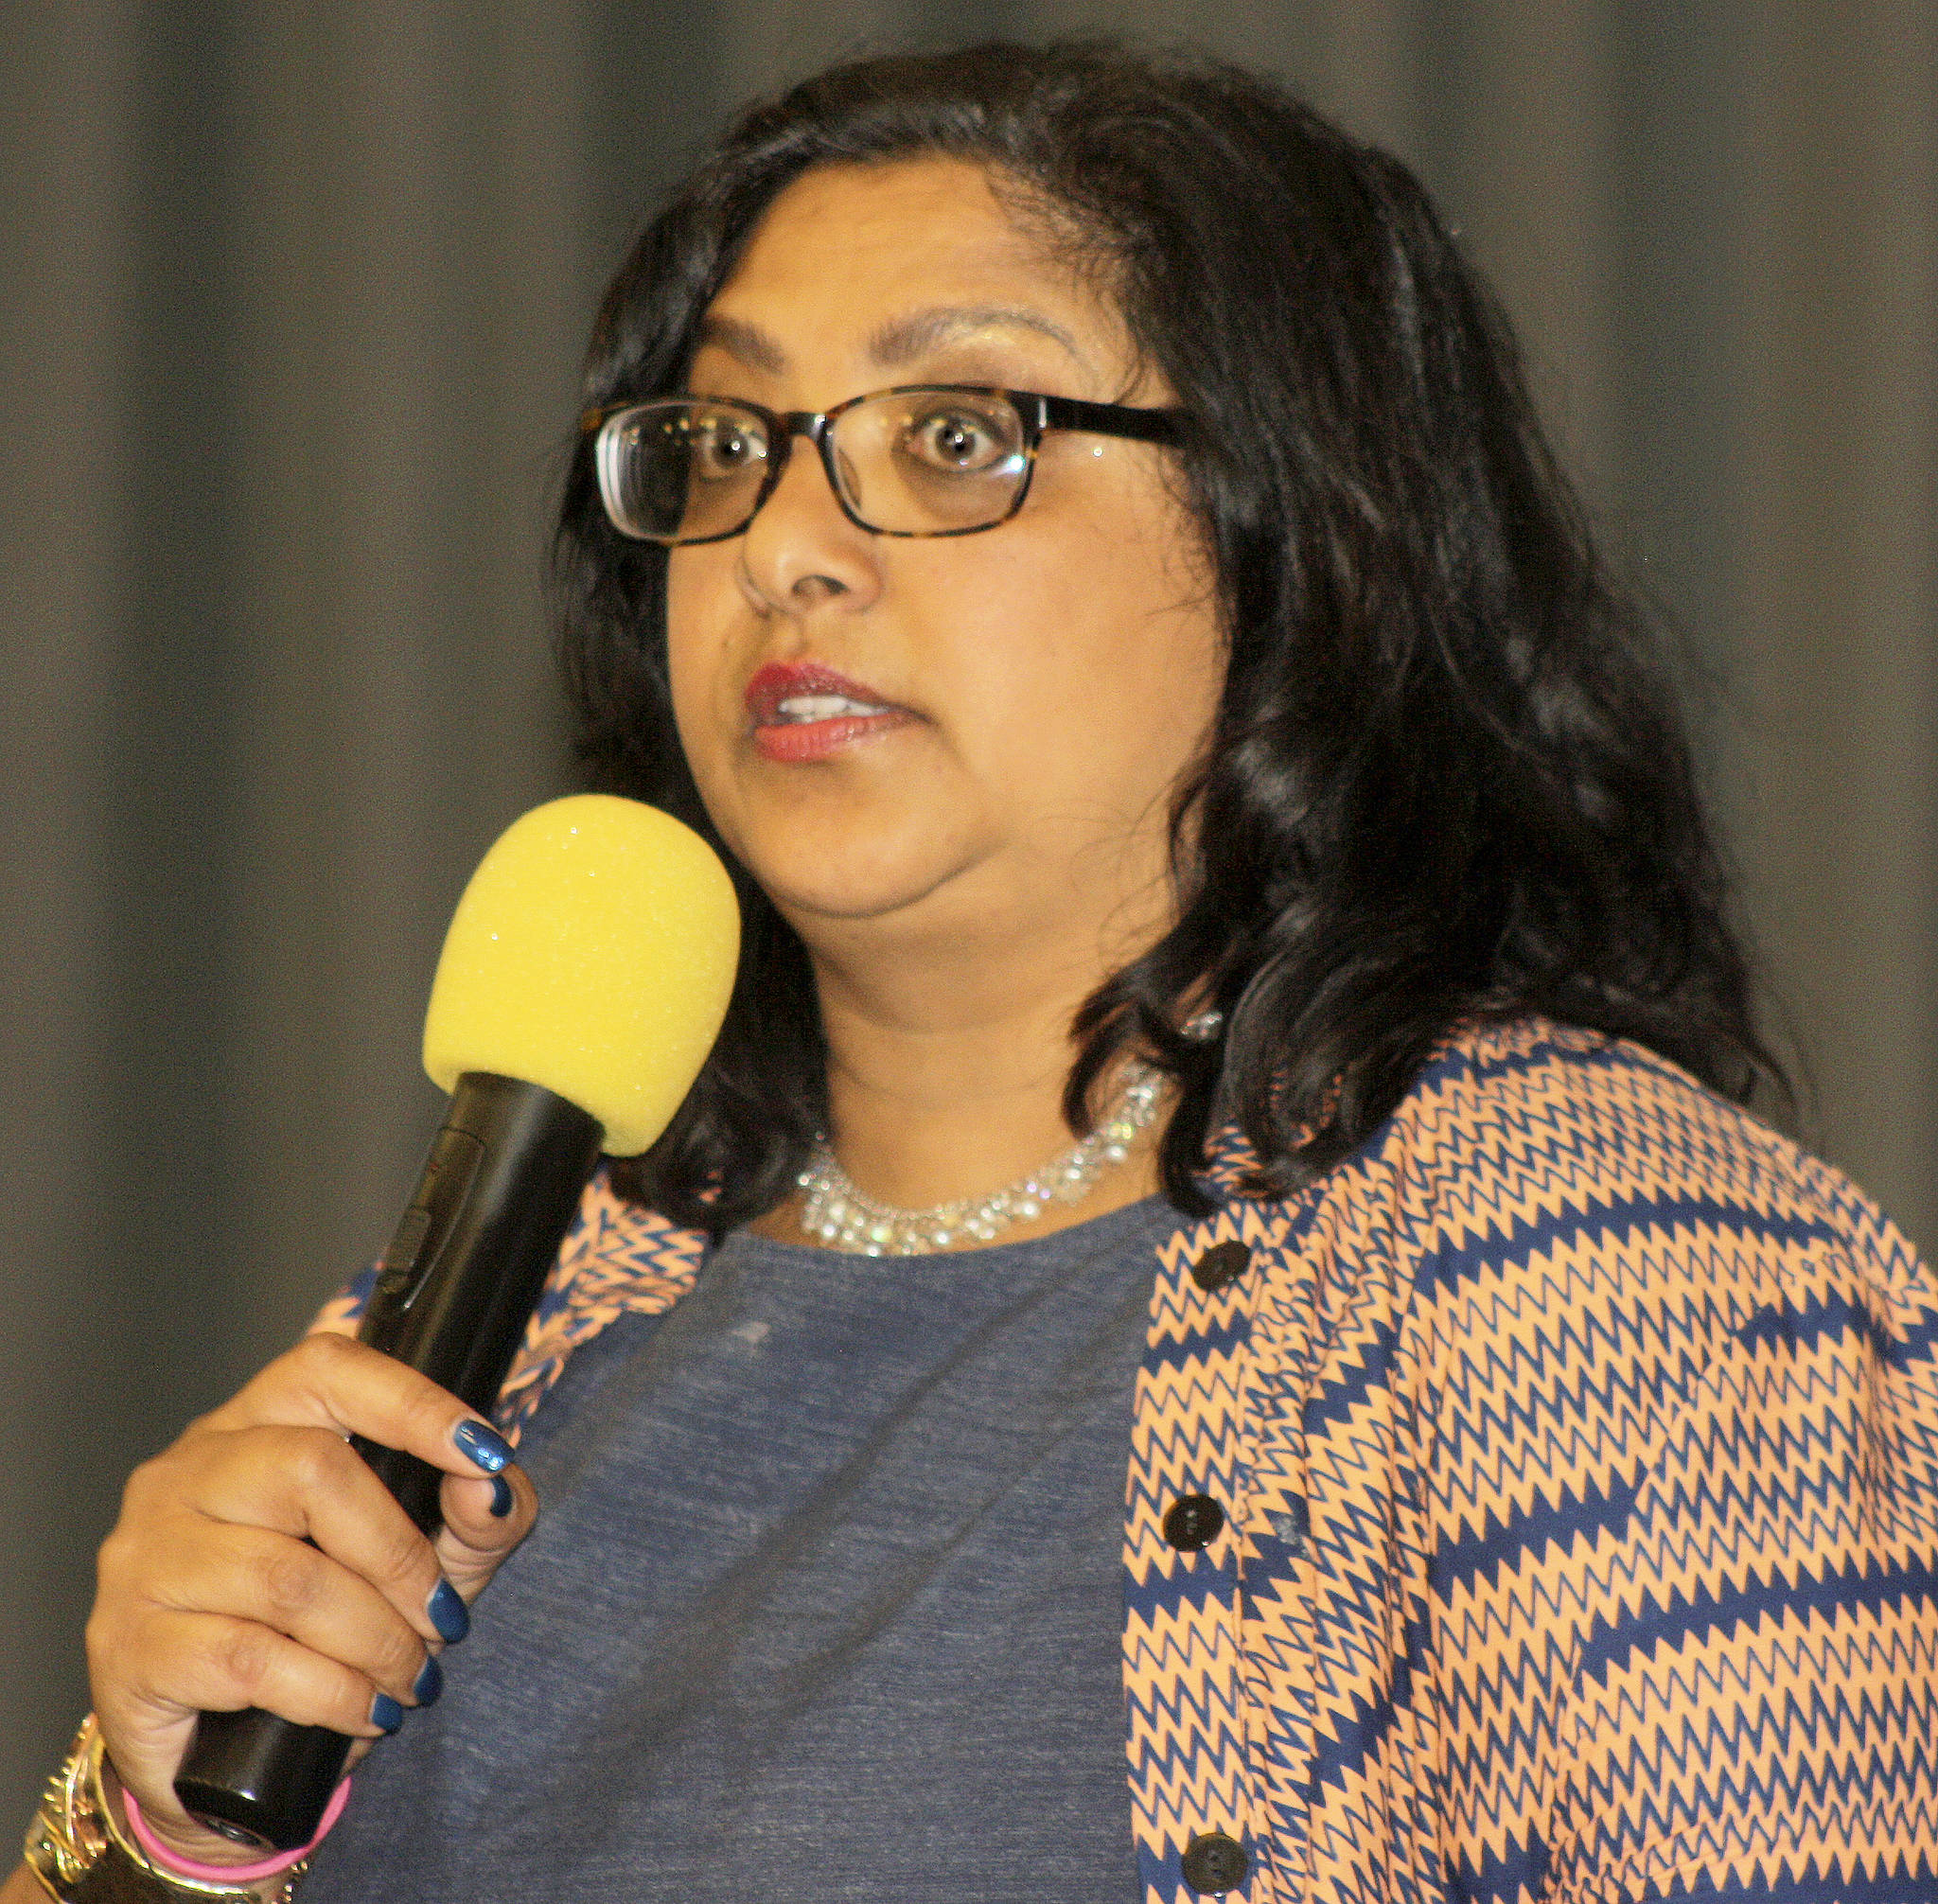 State Sen. Mona Das speaks at a Kent Chamber of Commerce luncheon in June. FILE PHOTO, Kent Reporter